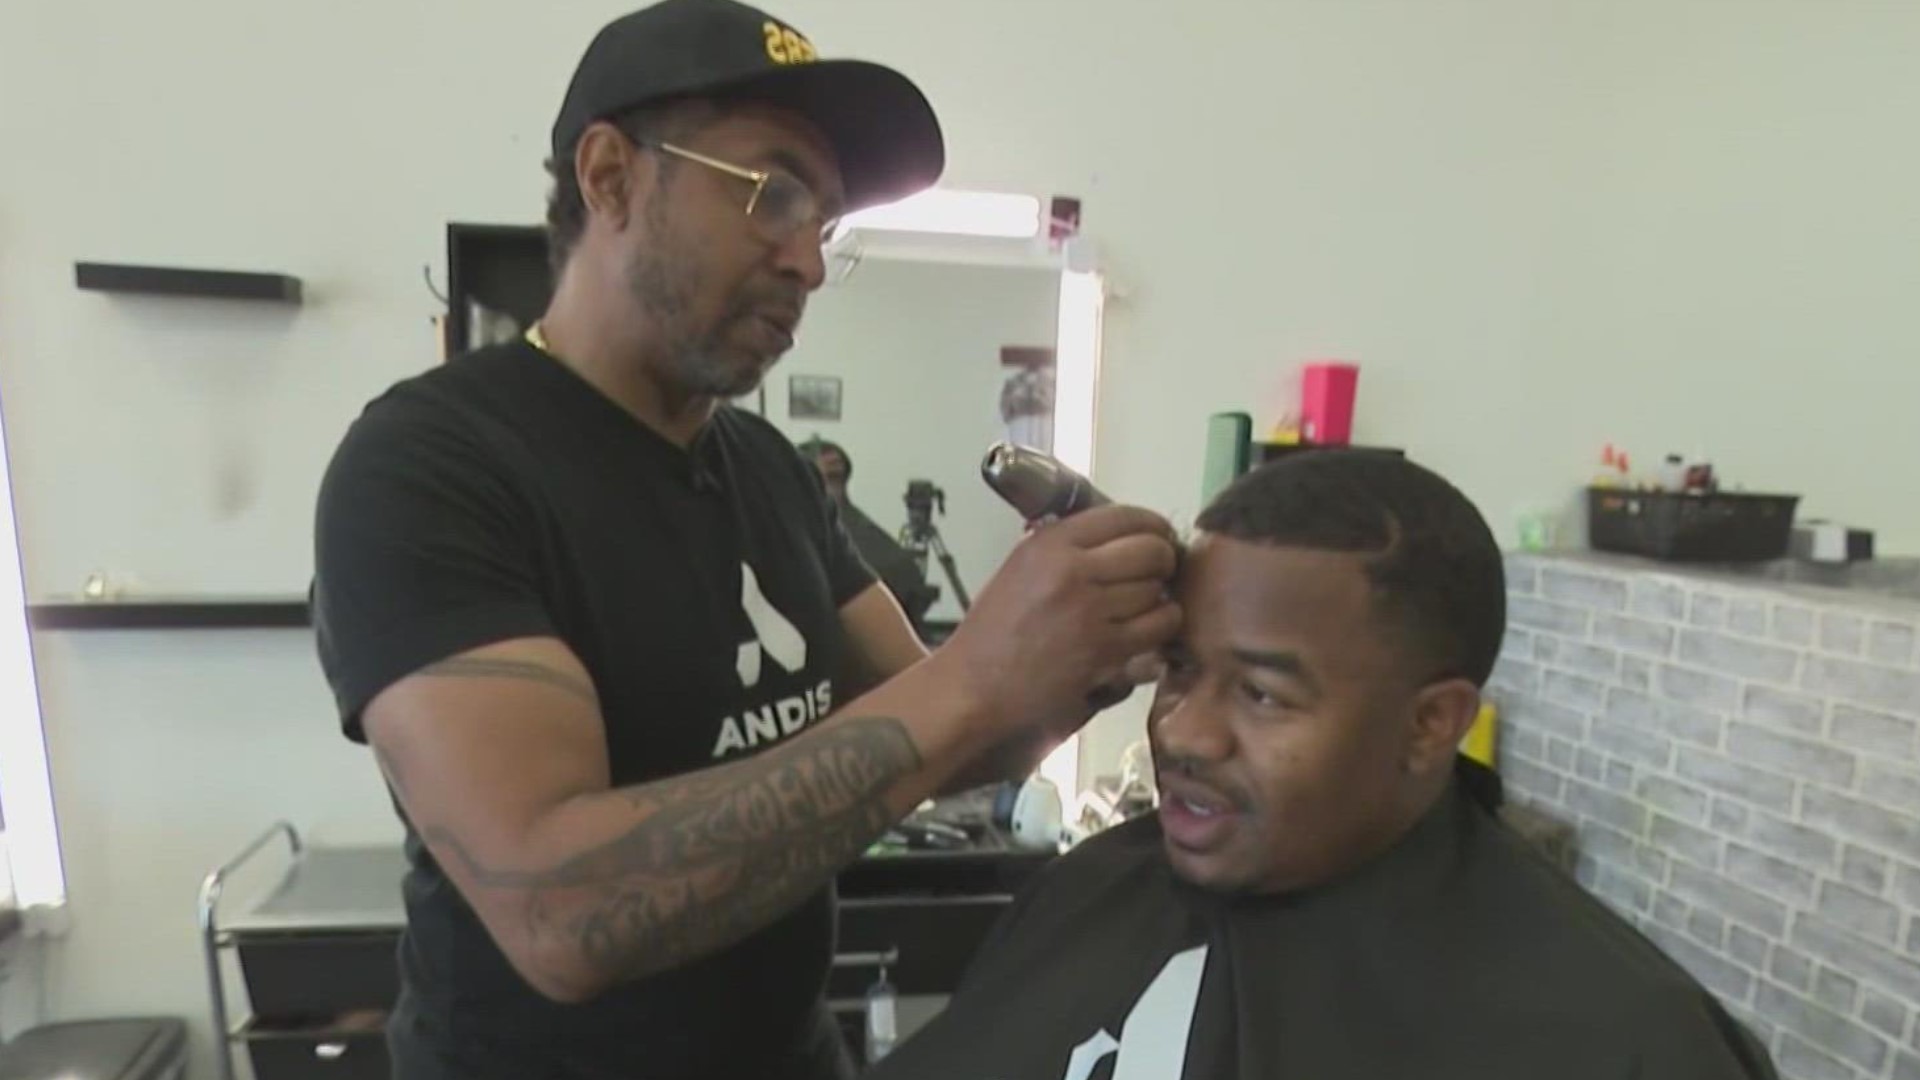 ‘The Confess Program' is looking to come to Northwest Arkansas with the goal to train barbers to become mental health advocates to get people the help they need.